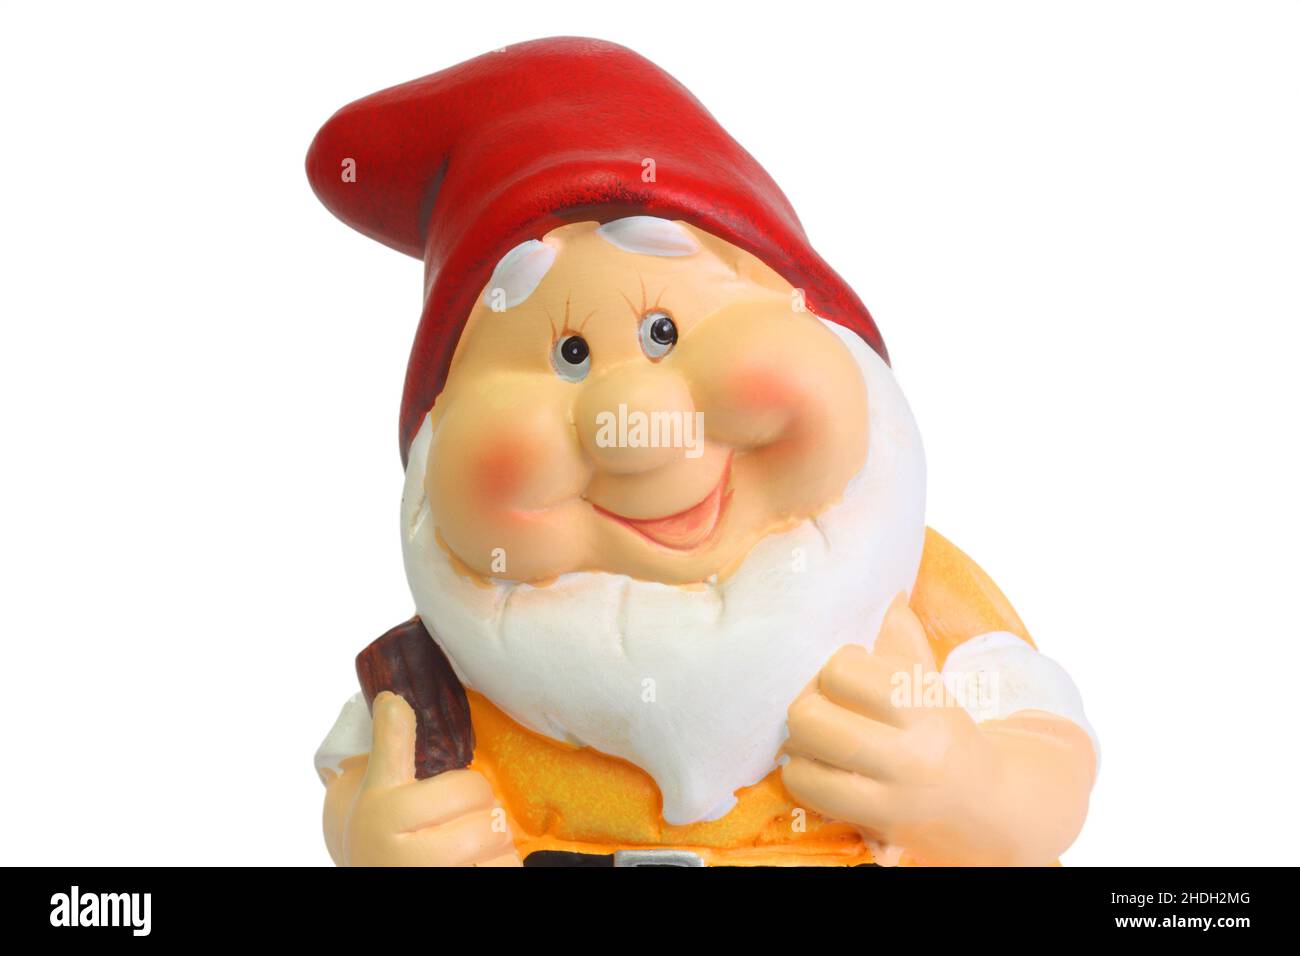 Page 2 - Garden Gnome Cut Out High Resolution Stock Photography and Images  - Alamy